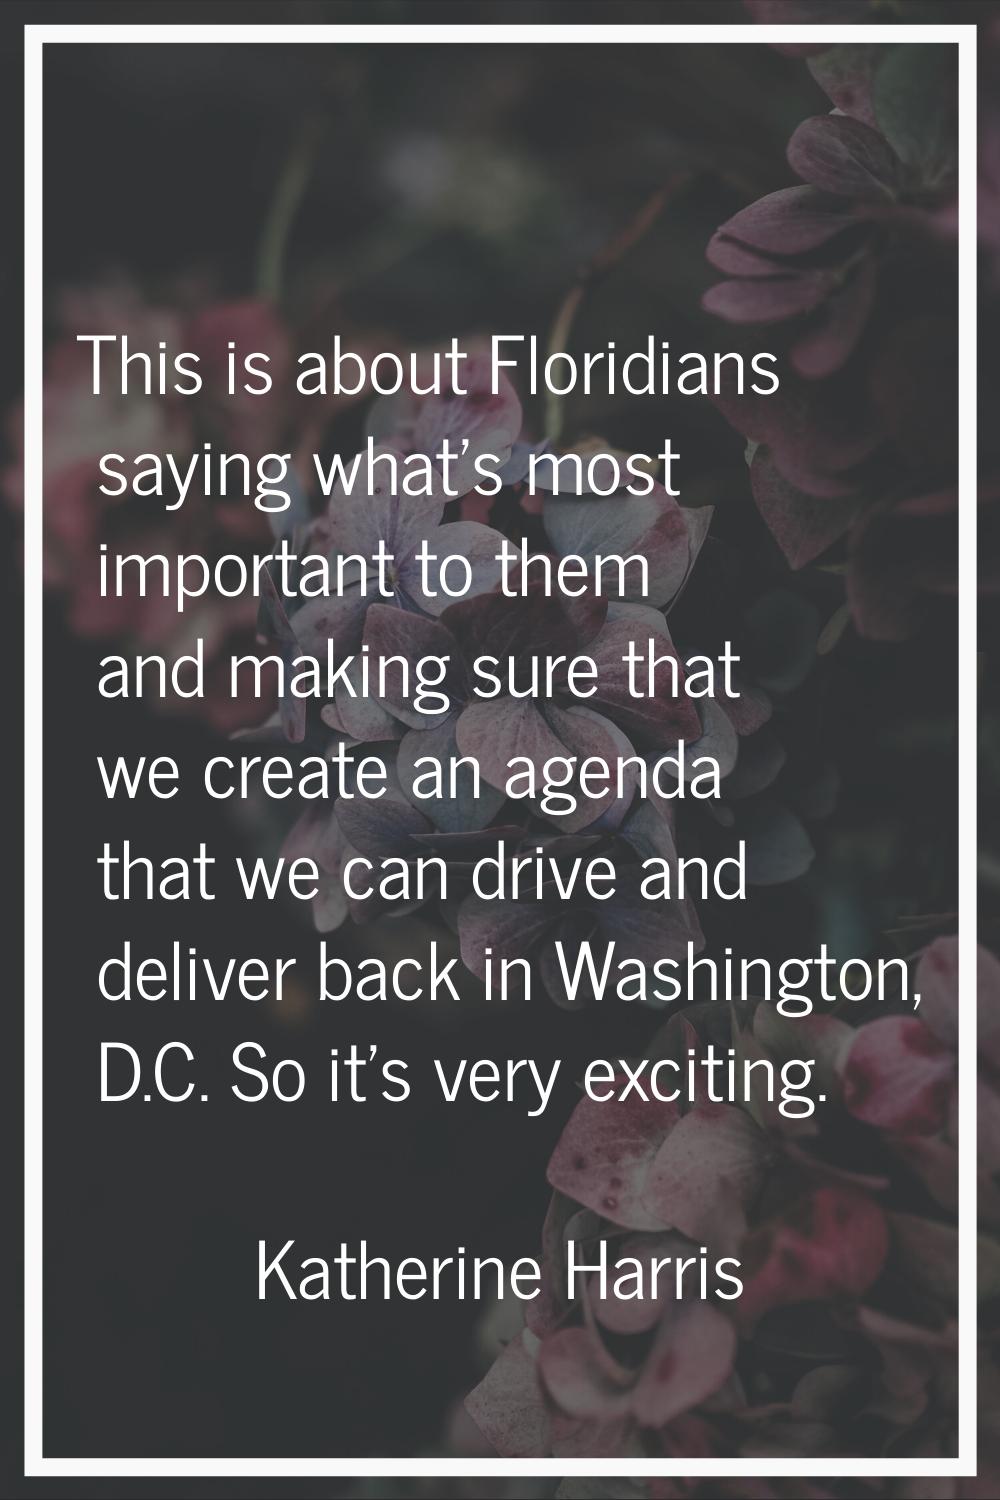 This is about Floridians saying what's most important to them and making sure that we create an age